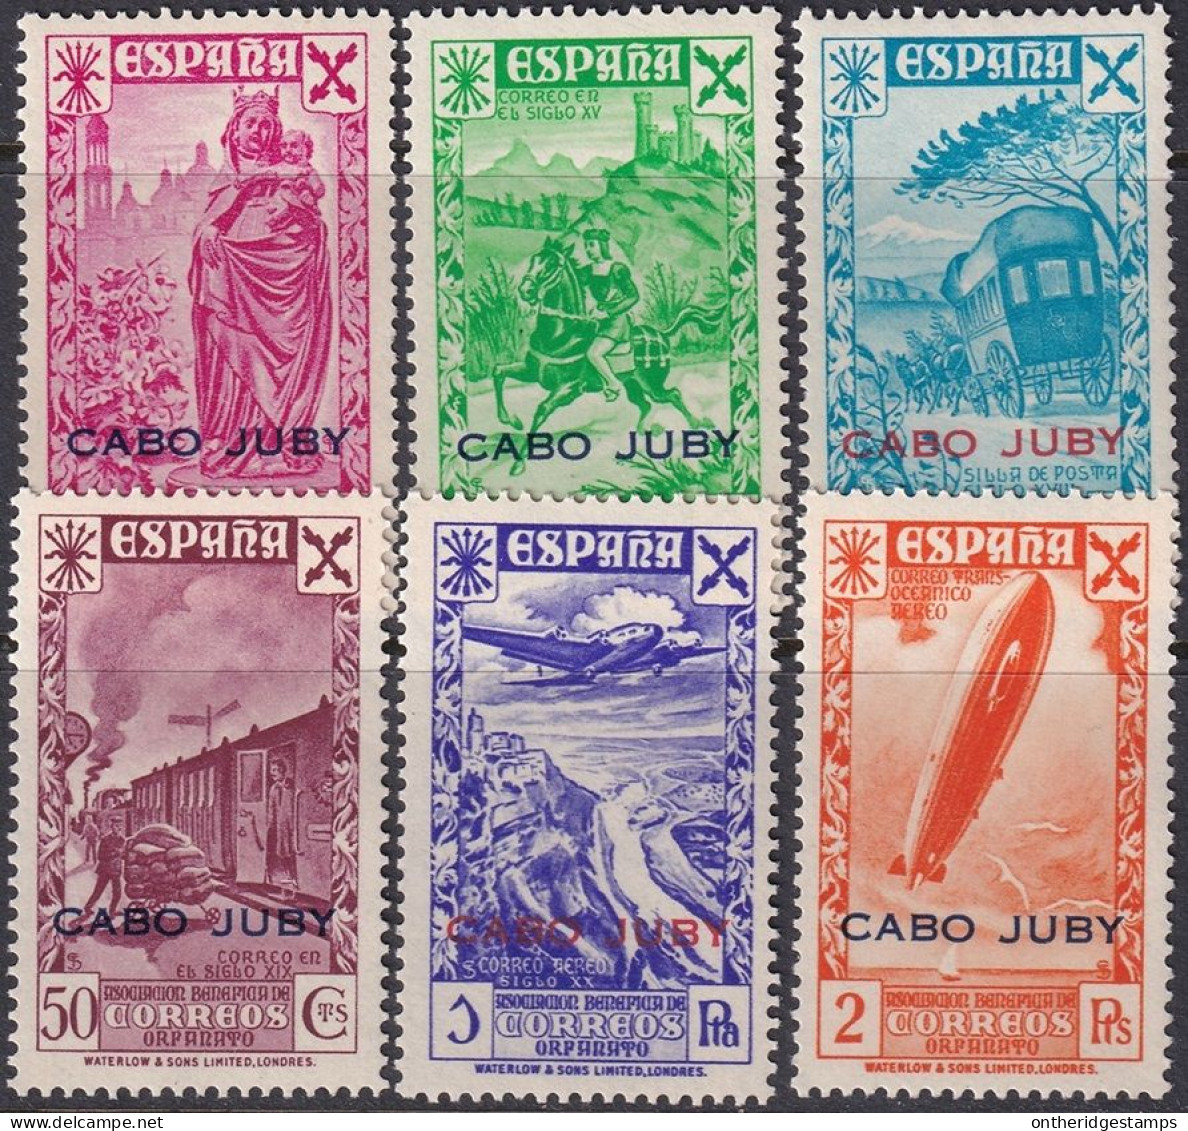 Cape Juby 1943 Beneficencia Ed 12-7 Cabo Juby Set MNH** - Cape Juby